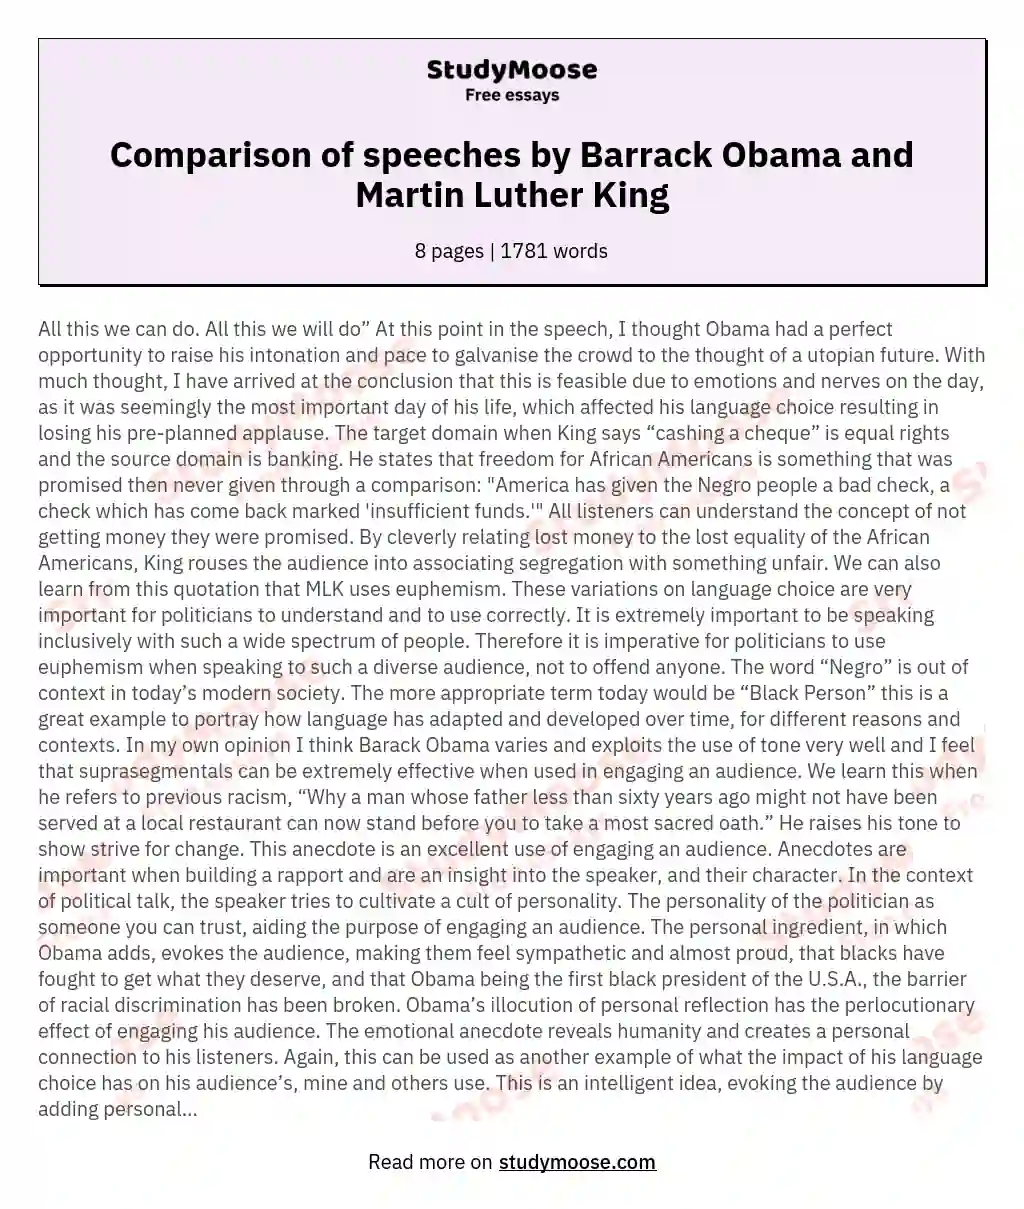 Comparison of speeches by Barrack Obama and Martin Luther King essay